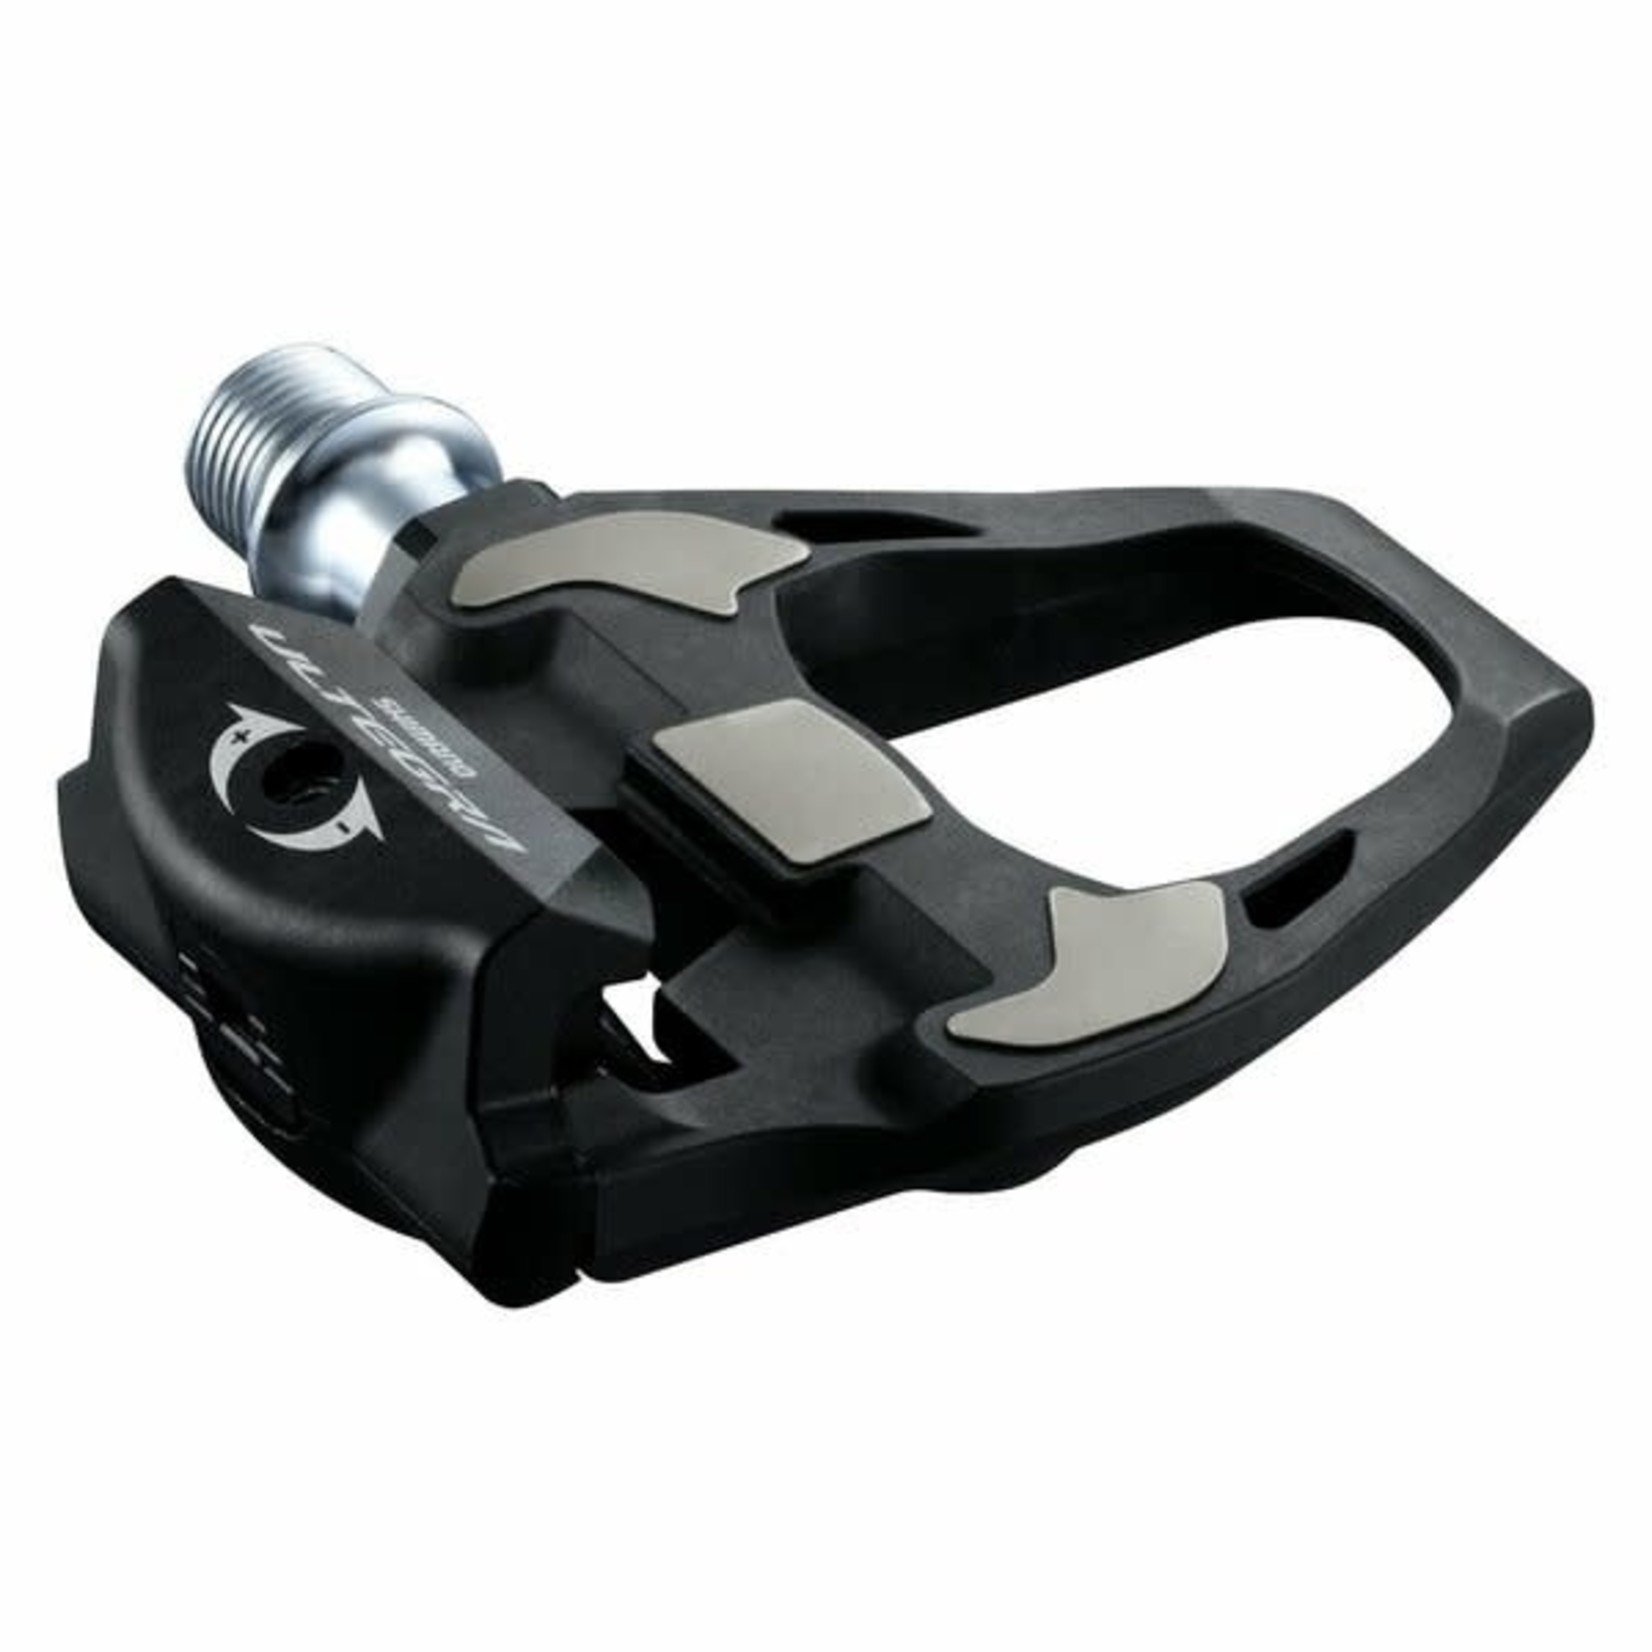 Shimano Shimano Ultegra SPD-SL Pedal, PD-R8000, Without Reflector, With Cleat